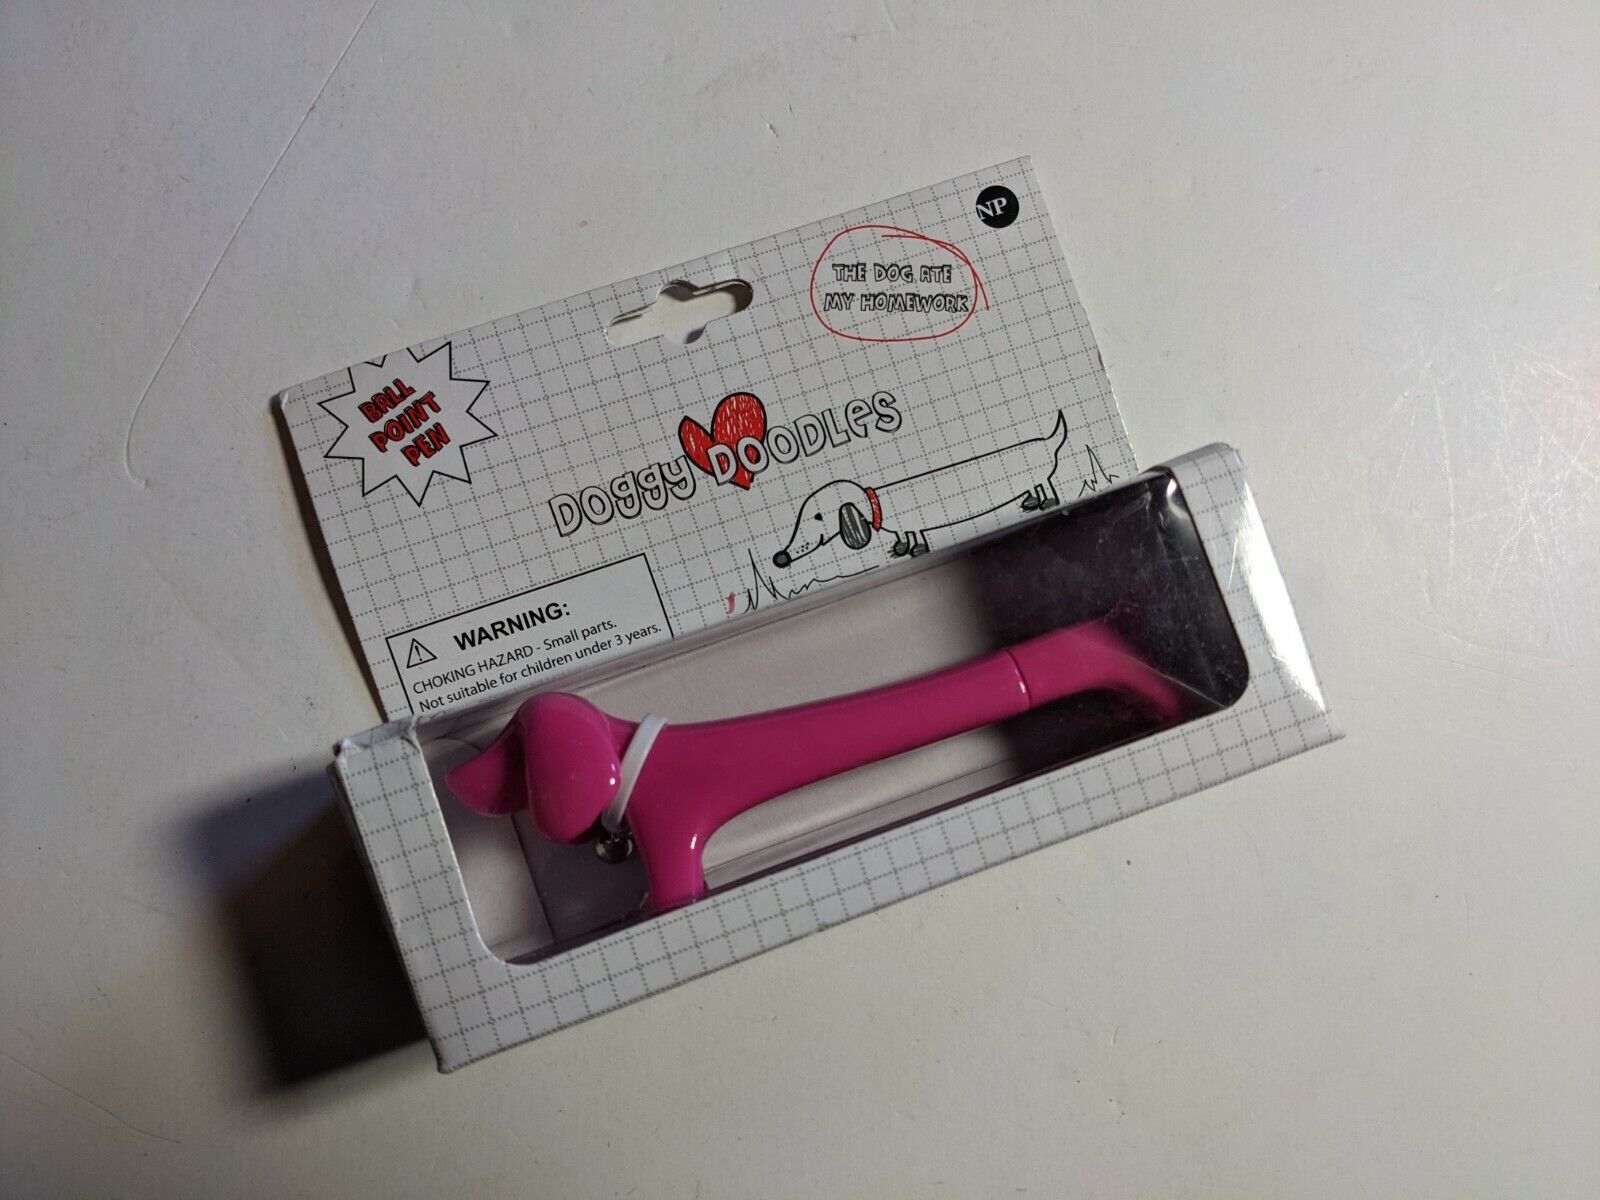 Fuschia Pink Doggy Doodles Pen, New in box. NPW-USA